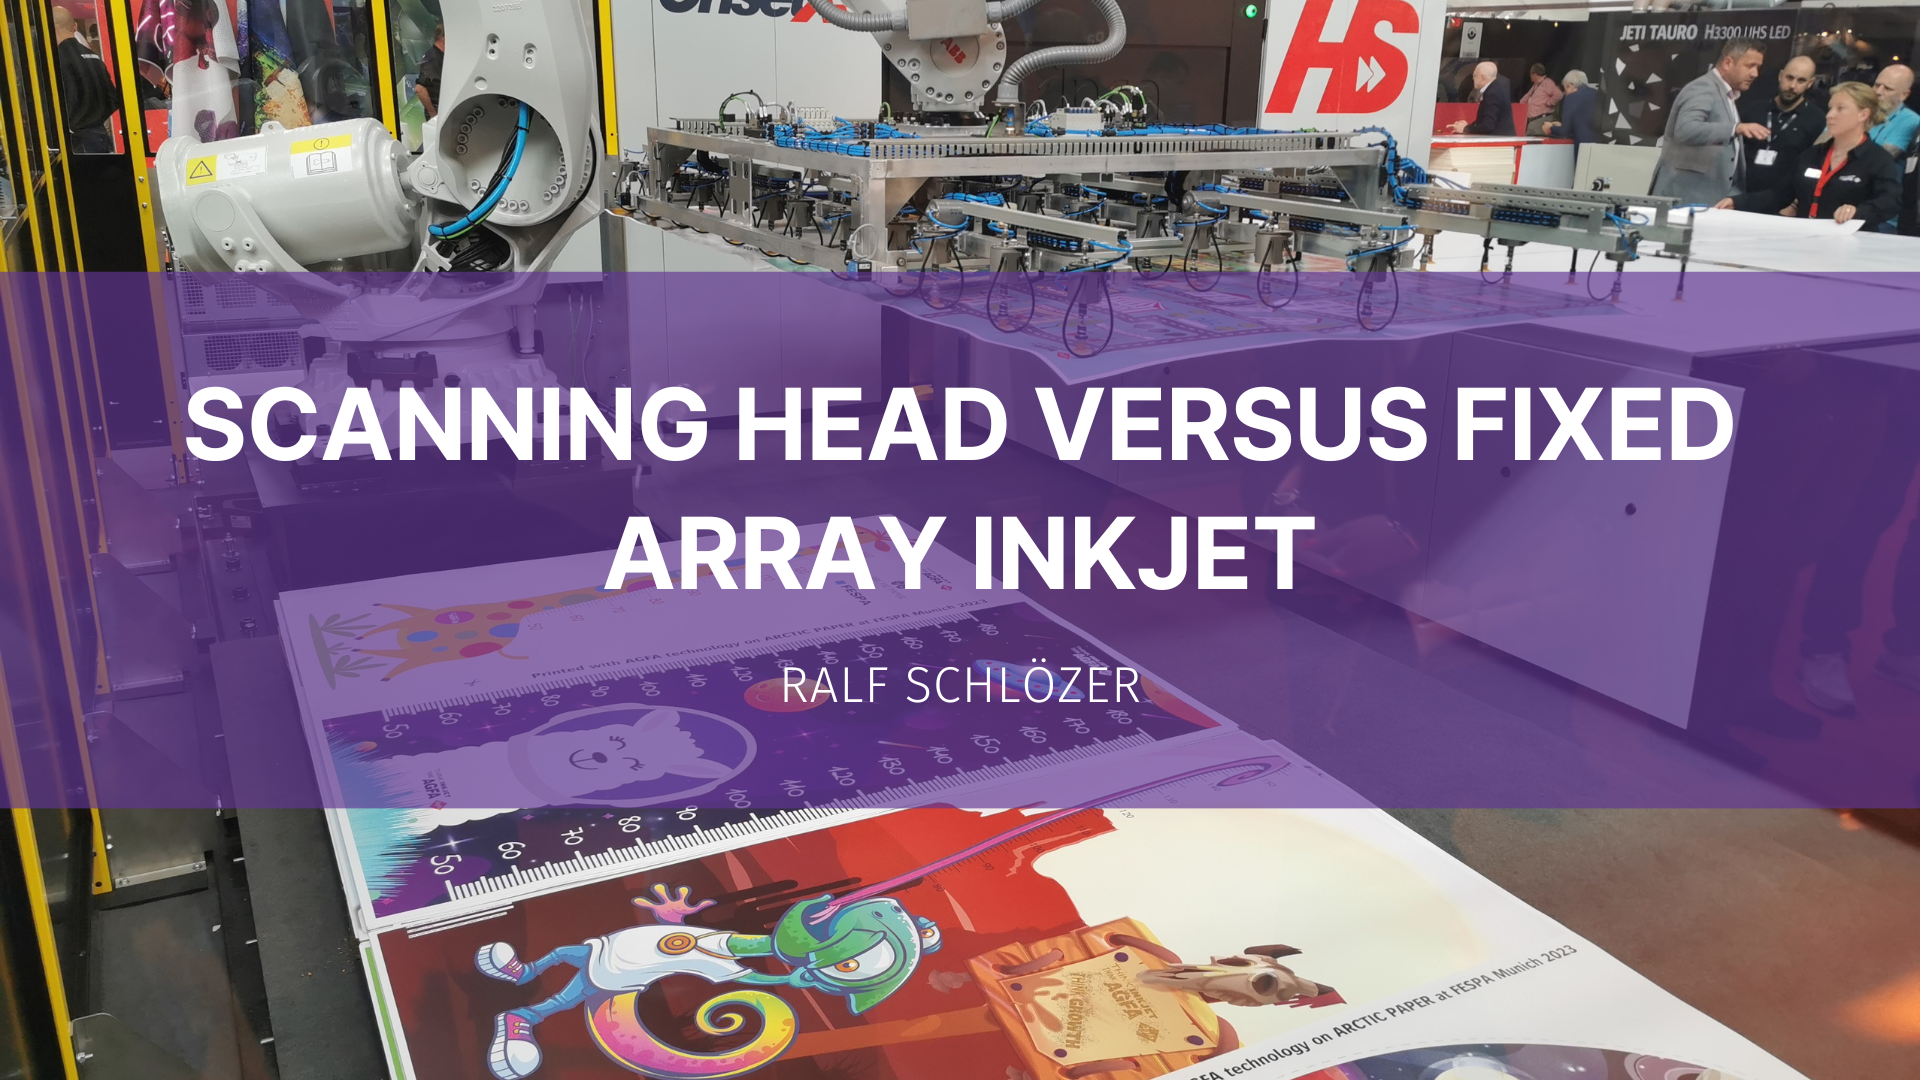 Featured image for “Scanning head versus fixed array inkjet”